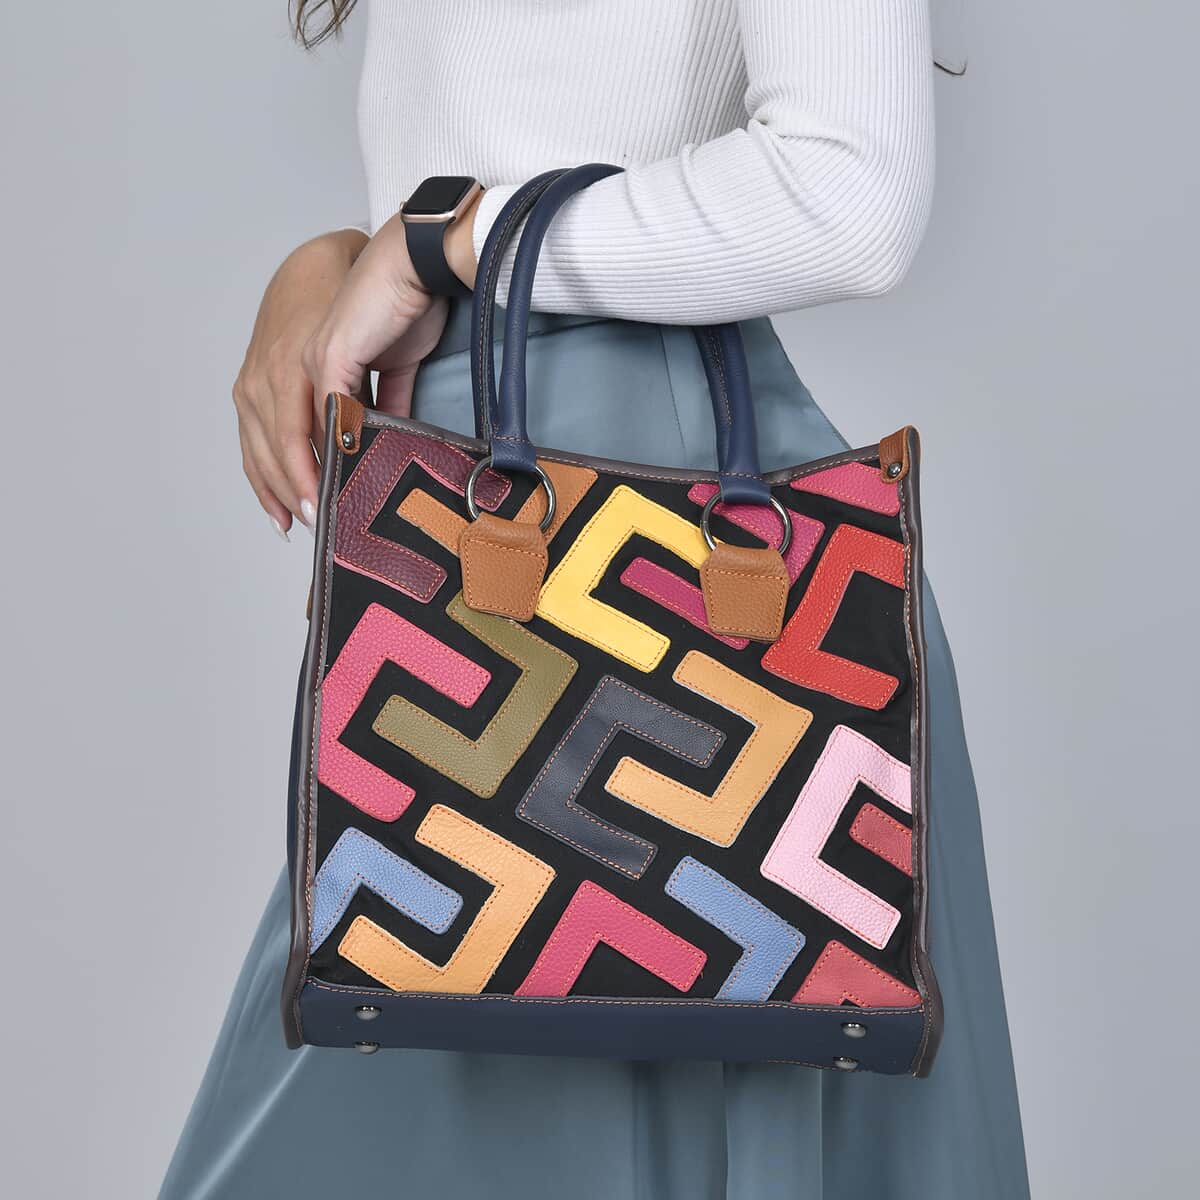 CHAOS BY ELSIE Multi Solid Color Fret Pattern Genuine Leather Convertible Tote Bag with Handle and Shoulder Strap (12.6"x5.12:x11.81") image number 2